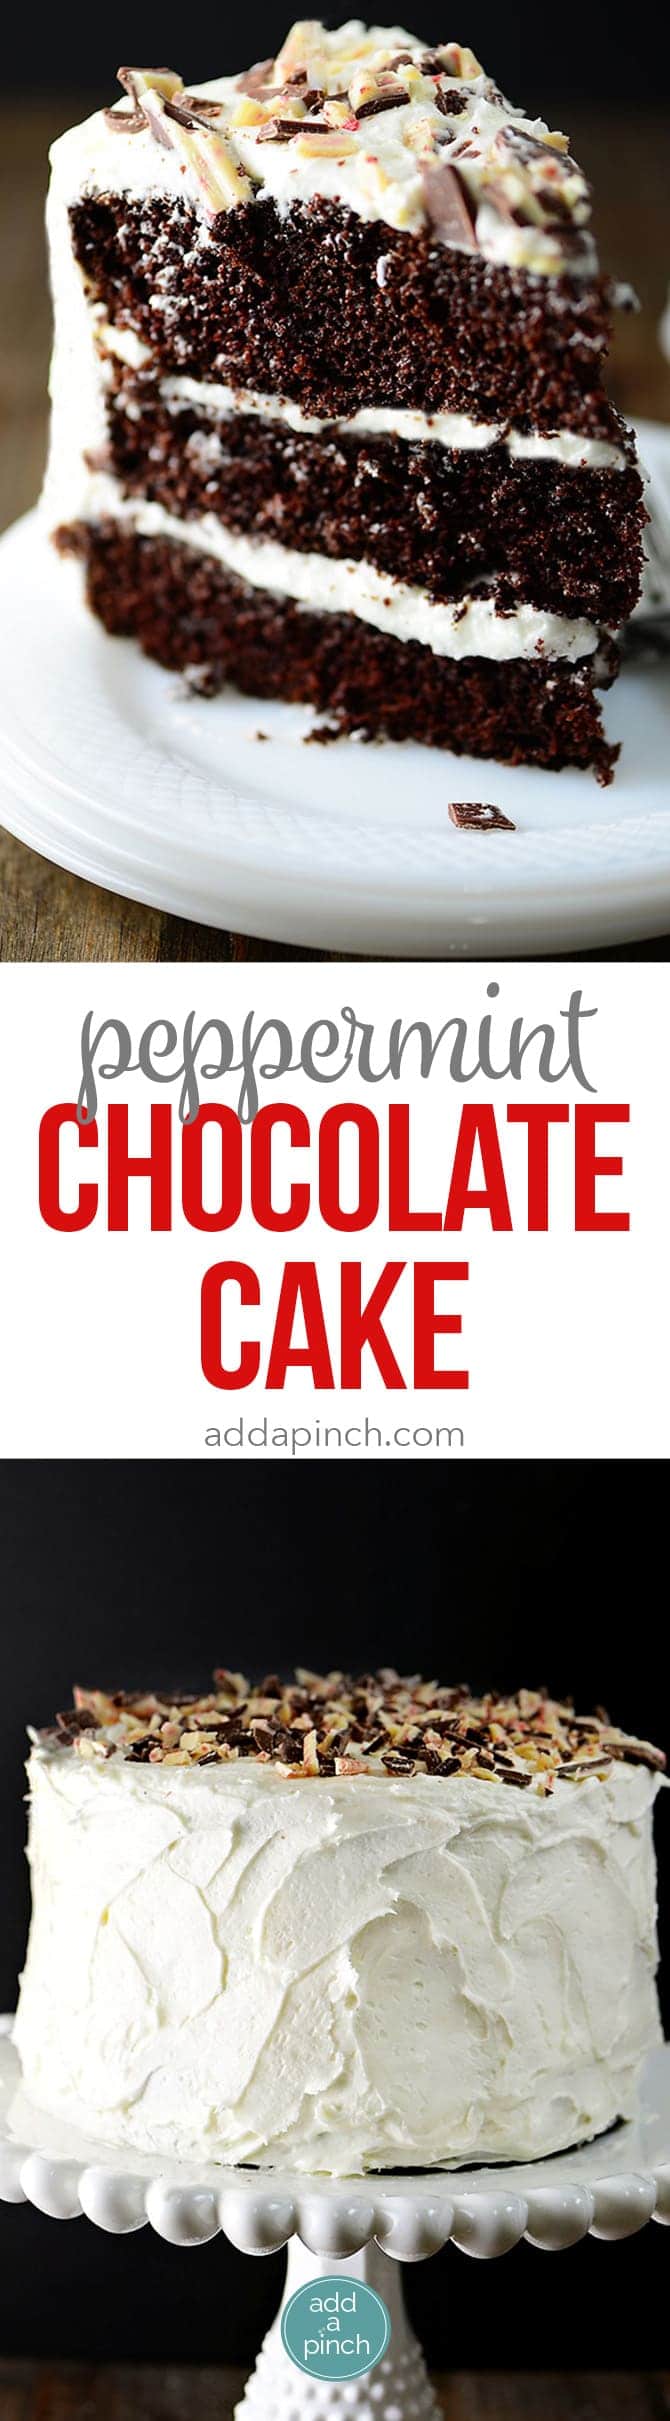 Peppermint Chocolate Cake Recipe - Chocolate Cake has to be an all-time favorite cake recipe and this Peppermint Chocolate Cake version is perfect for the holidays. // addapinch.com